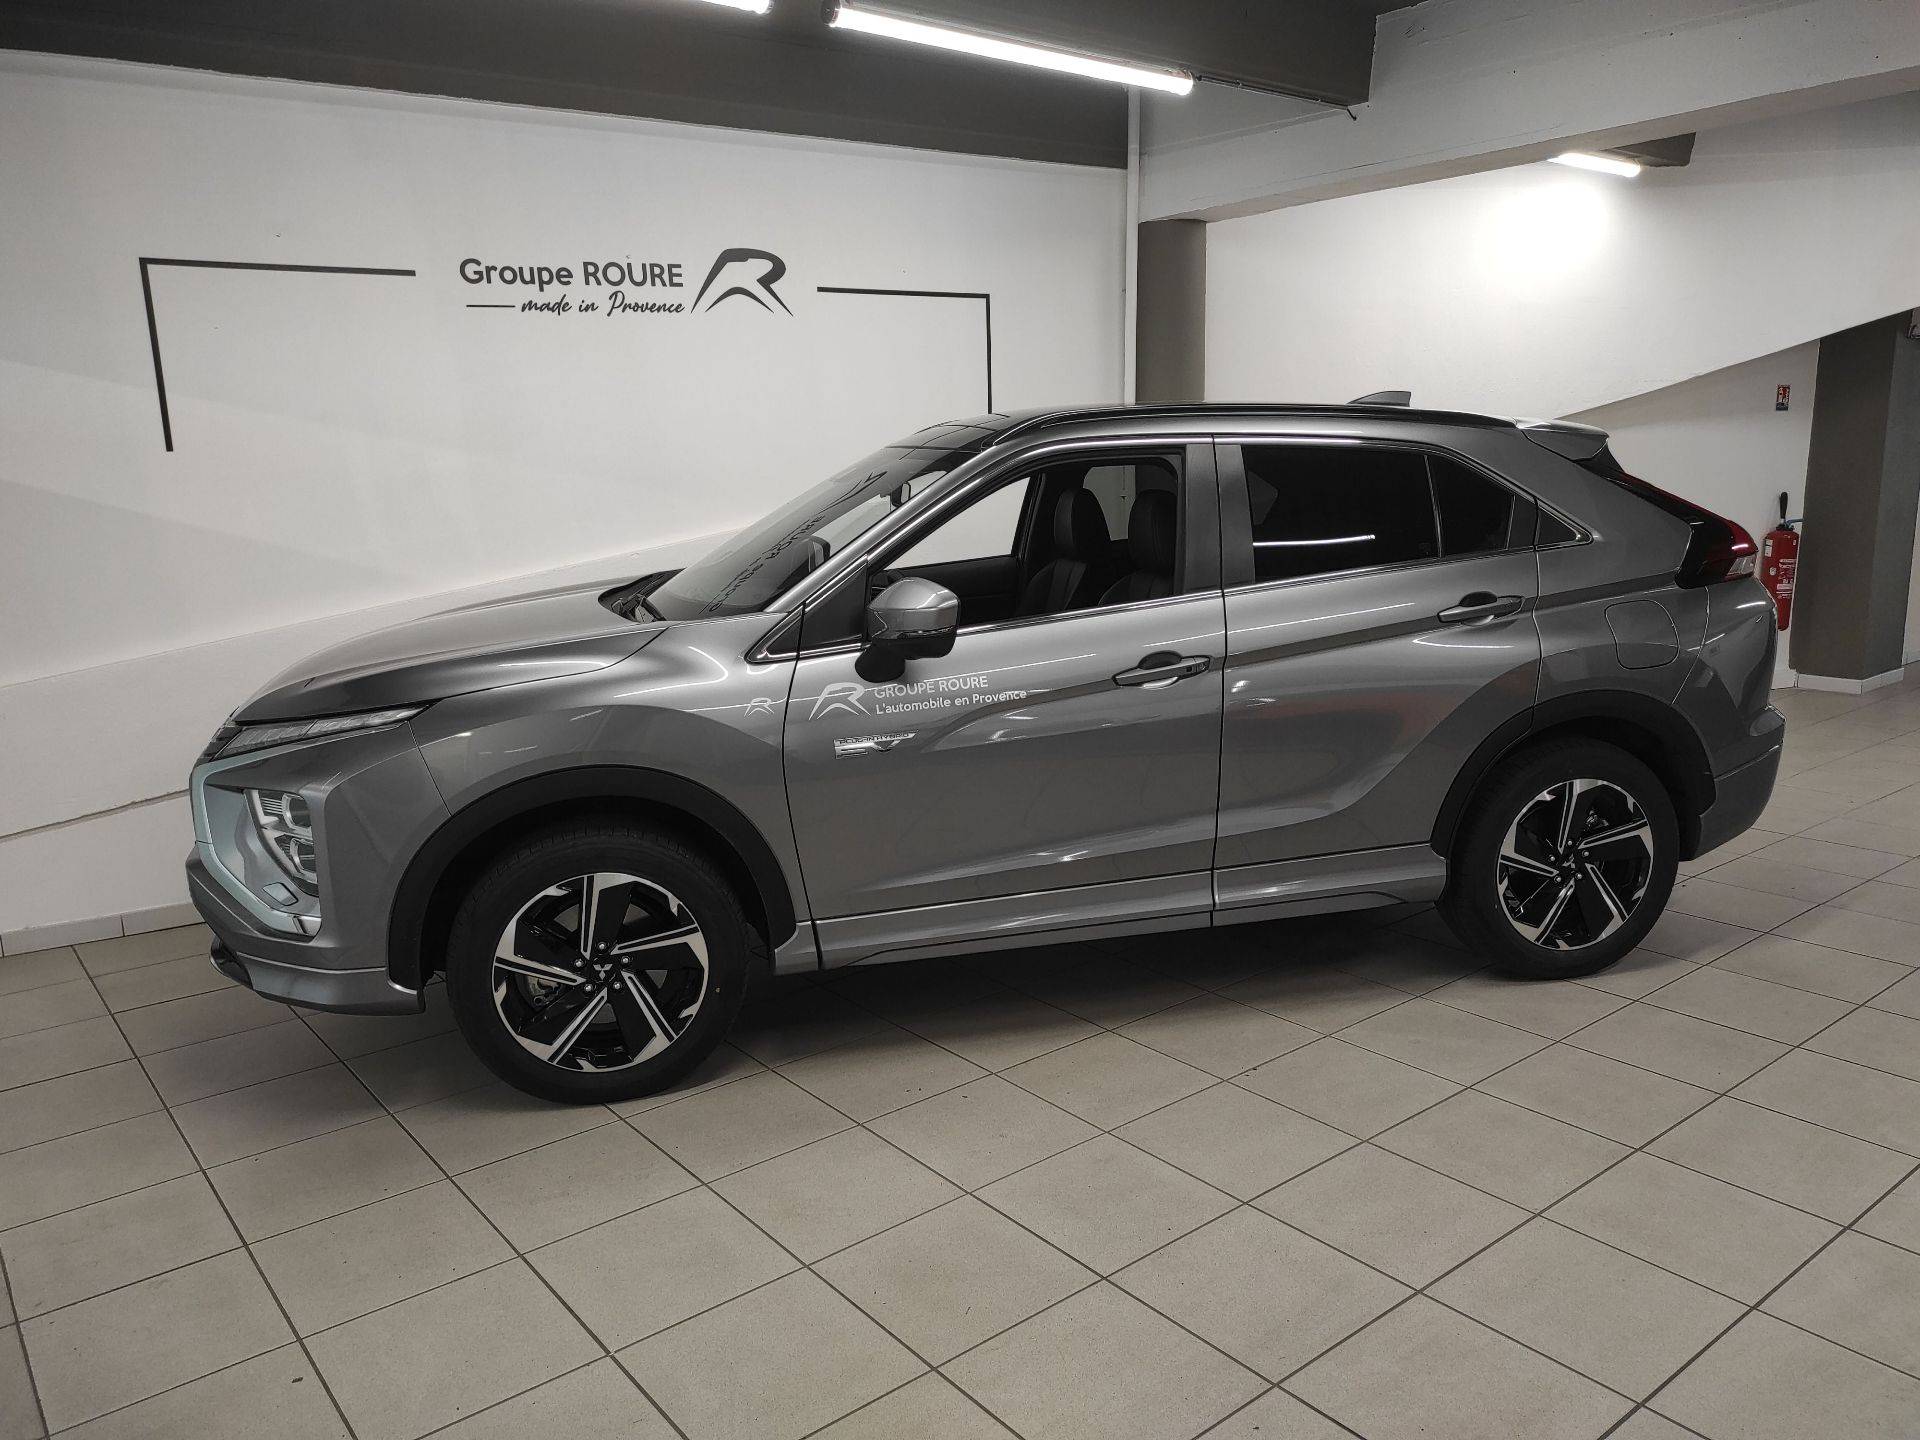 MITSUBISHI-ECLIPSE CROSS-Eclipse Cross 2.4 MIVEC PHEV Twin Motor 4WD-Instyle-40900-6900-roure-automobiles